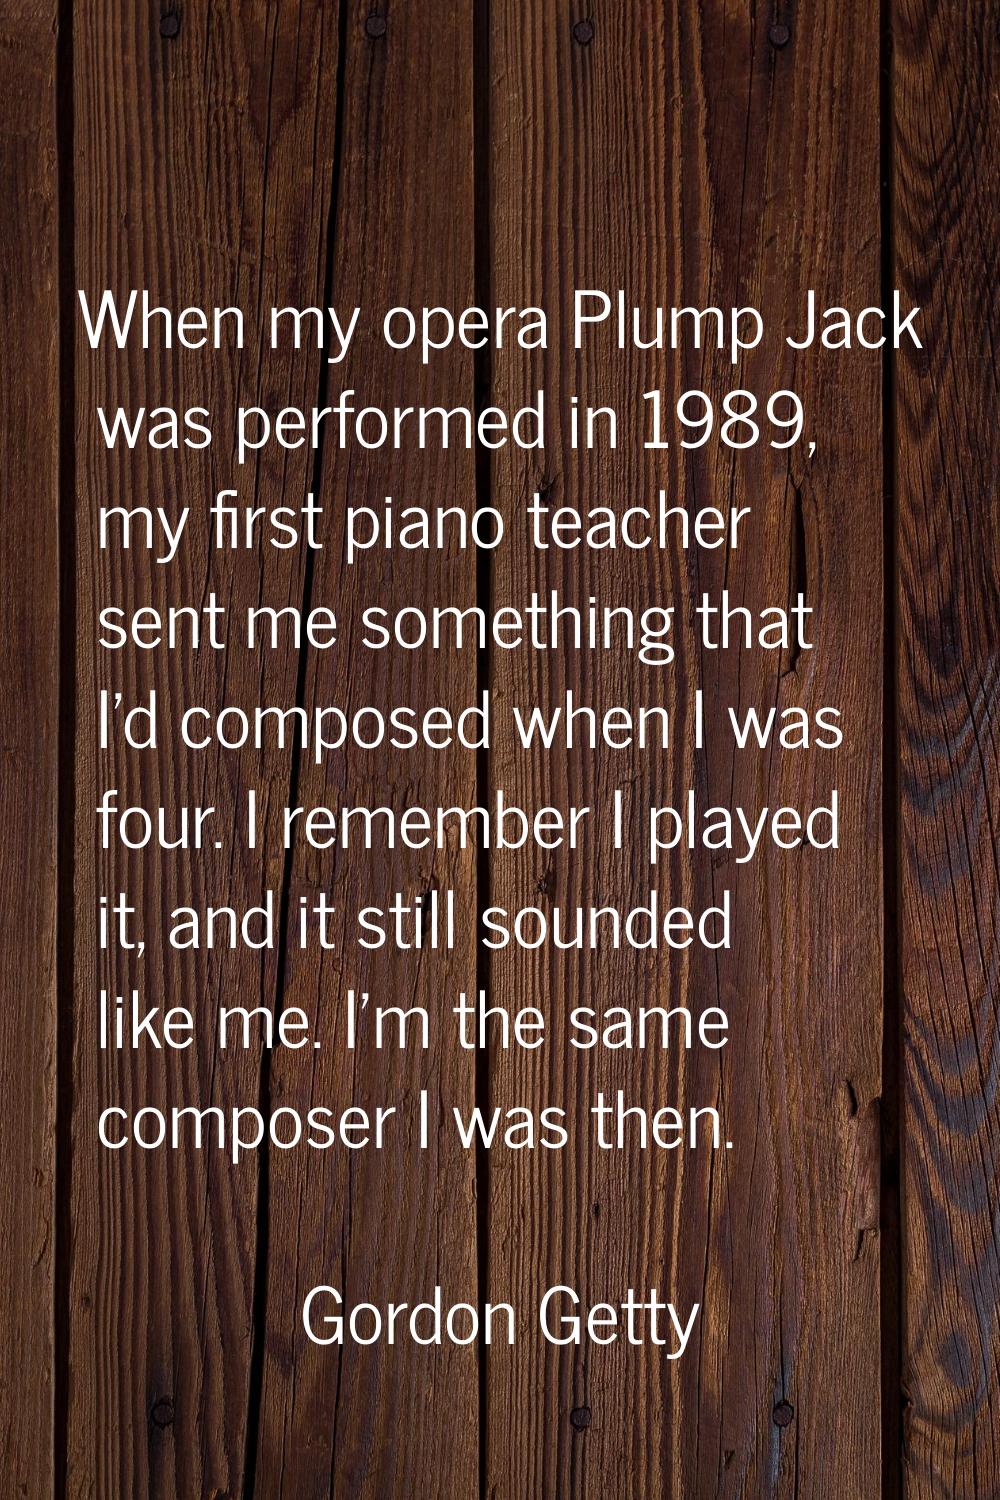 When my opera Plump Jack was performed in 1989, my first piano teacher sent me something that I'd c